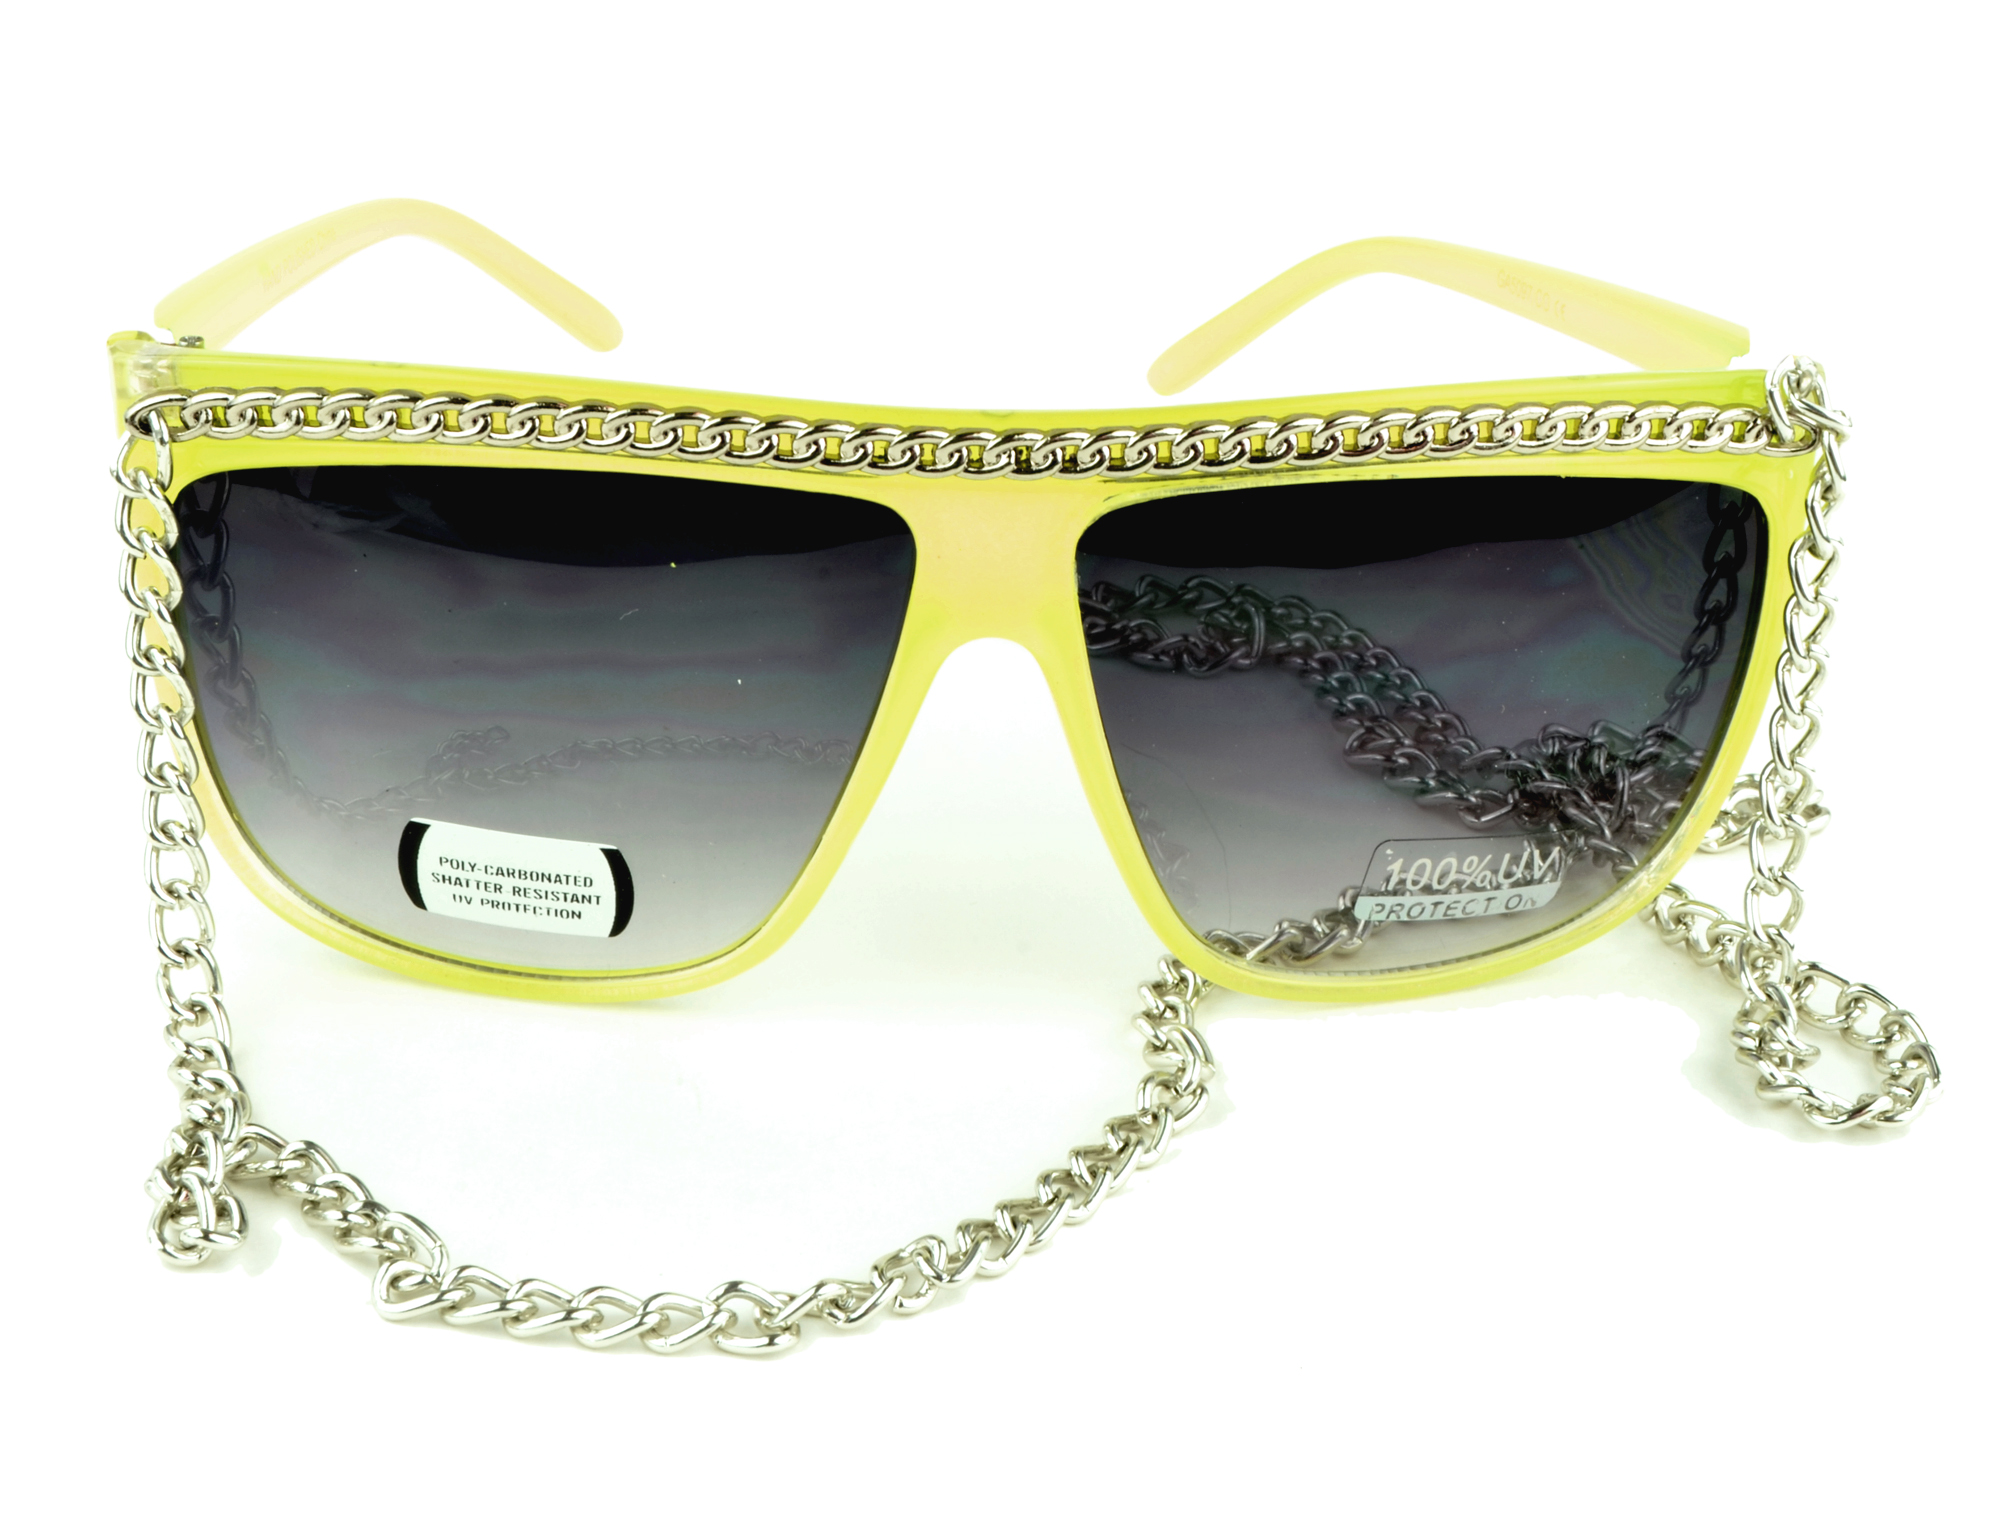 Belle Donne - Women's Hot Celebrity Style Chain Fashion Sunglasses - Yellow One Size